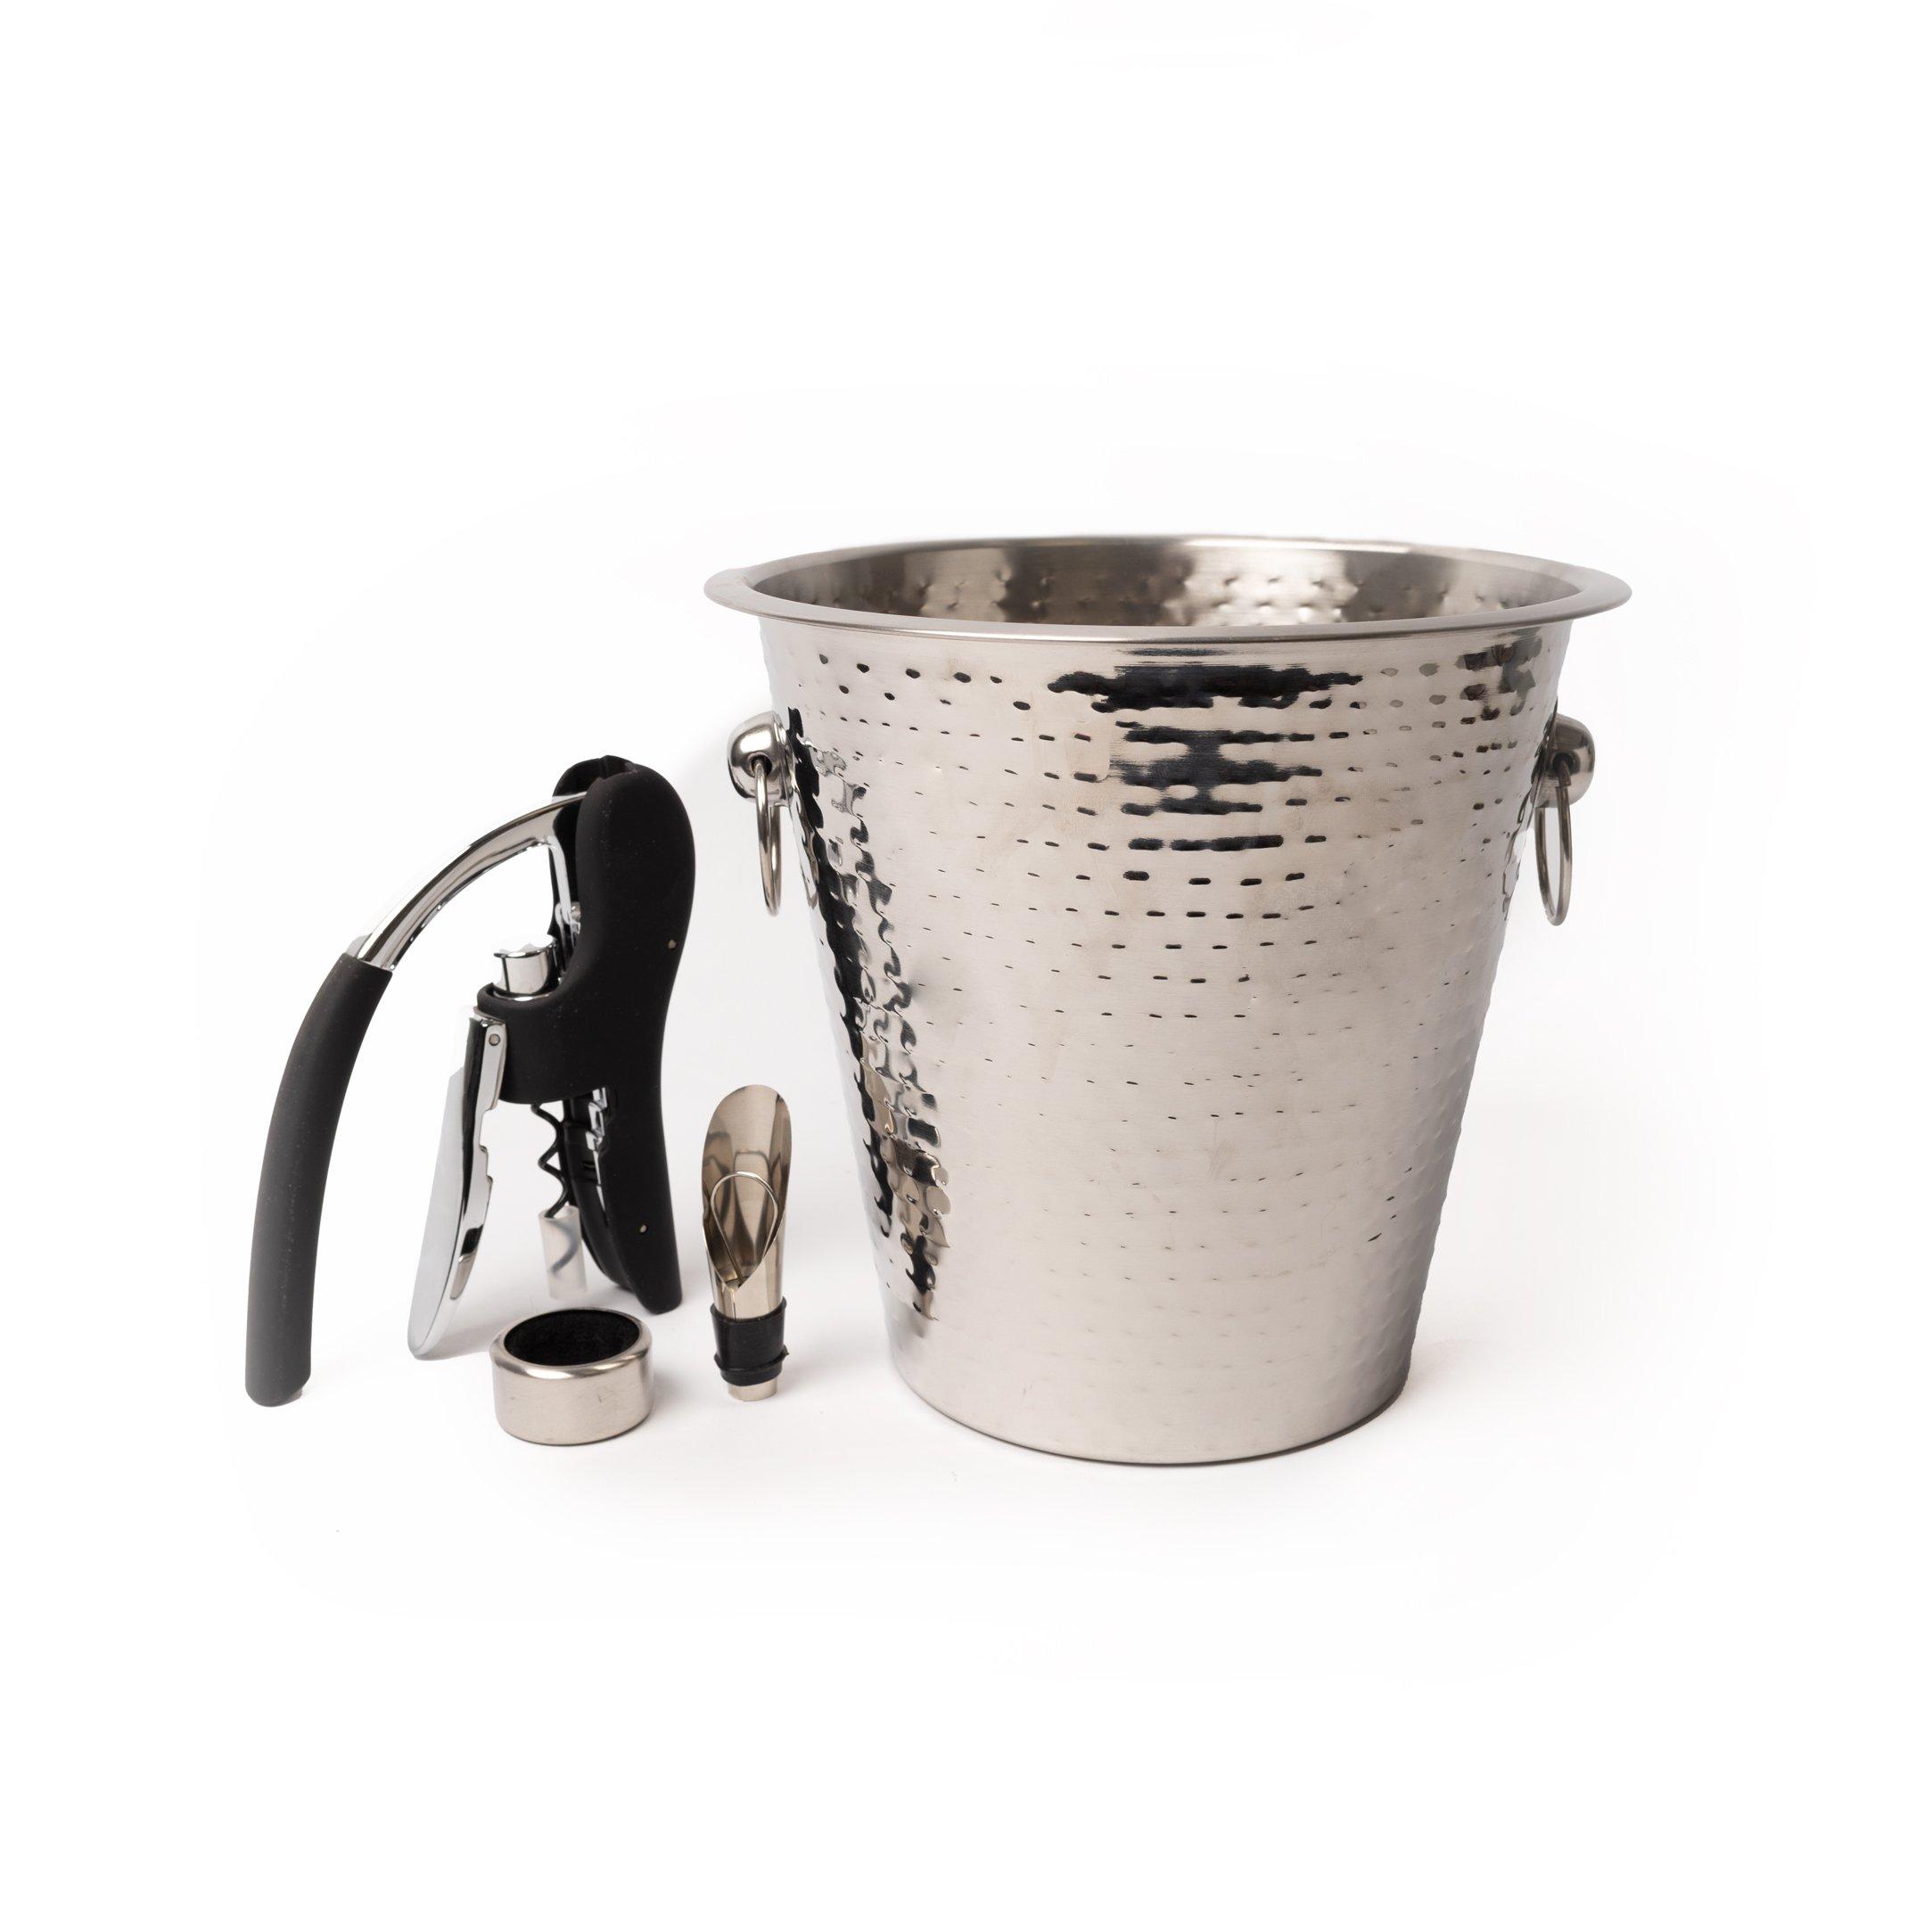 Wine Accessories Set including Stainless Steel Hammered Wine Bucket, Corkscrew, Pourer and Drip Coll